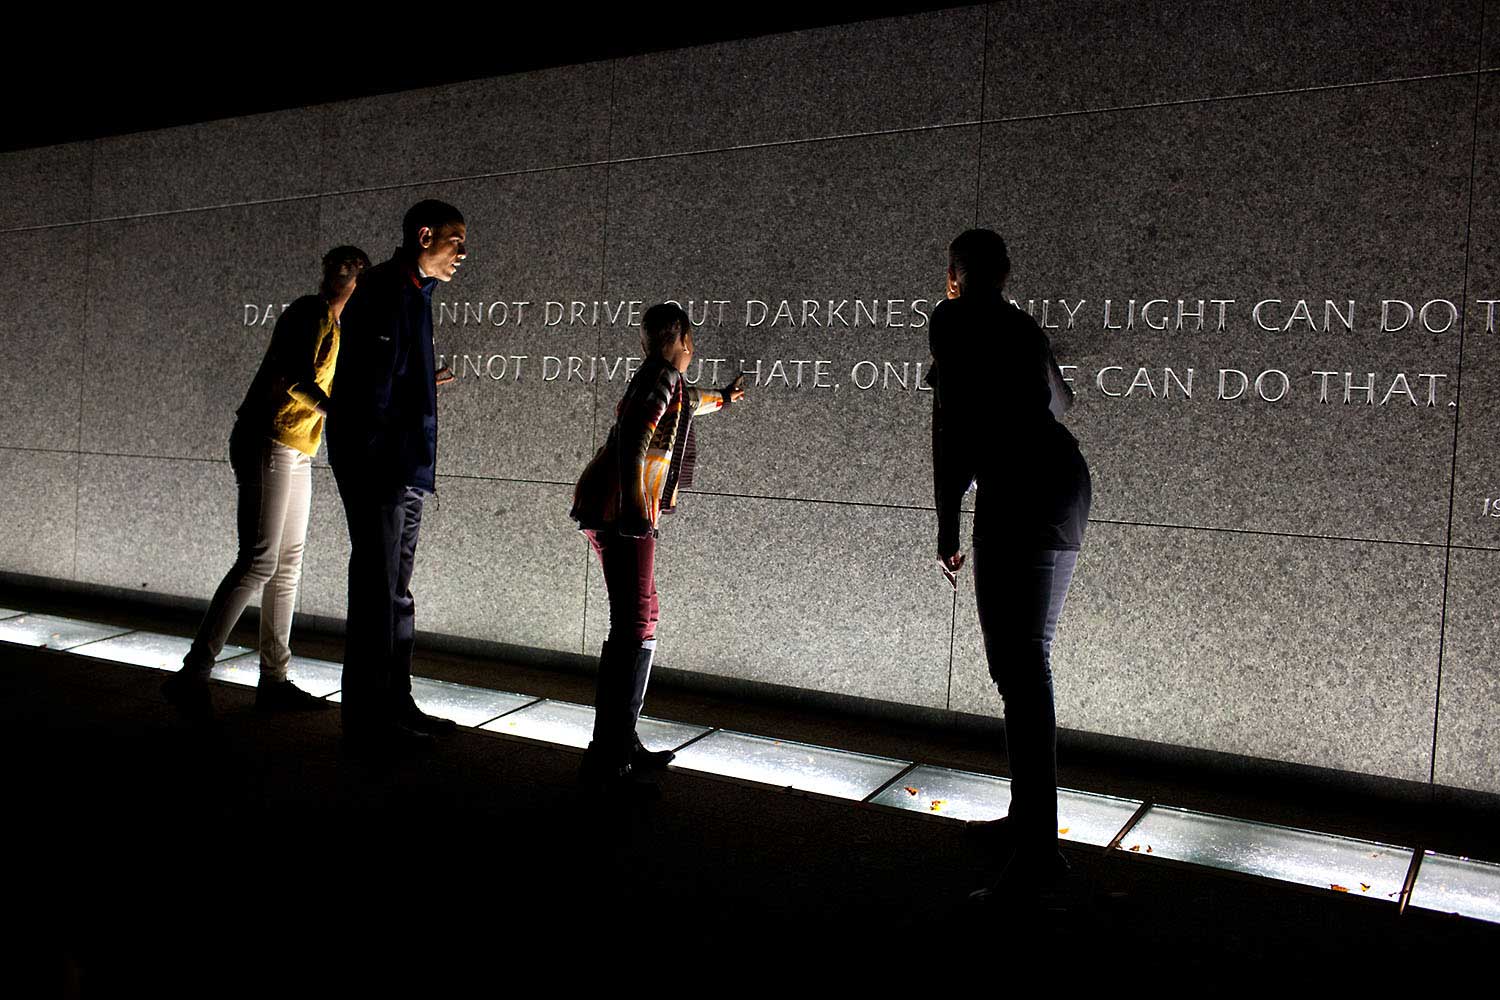 The Obama family make an unannounced visit to tour the Martin Luther King, Jr. National Memorial in Washington, D.C., Oct. 14, 2011, the night before the President made remarks at the official dedication of the memorial.